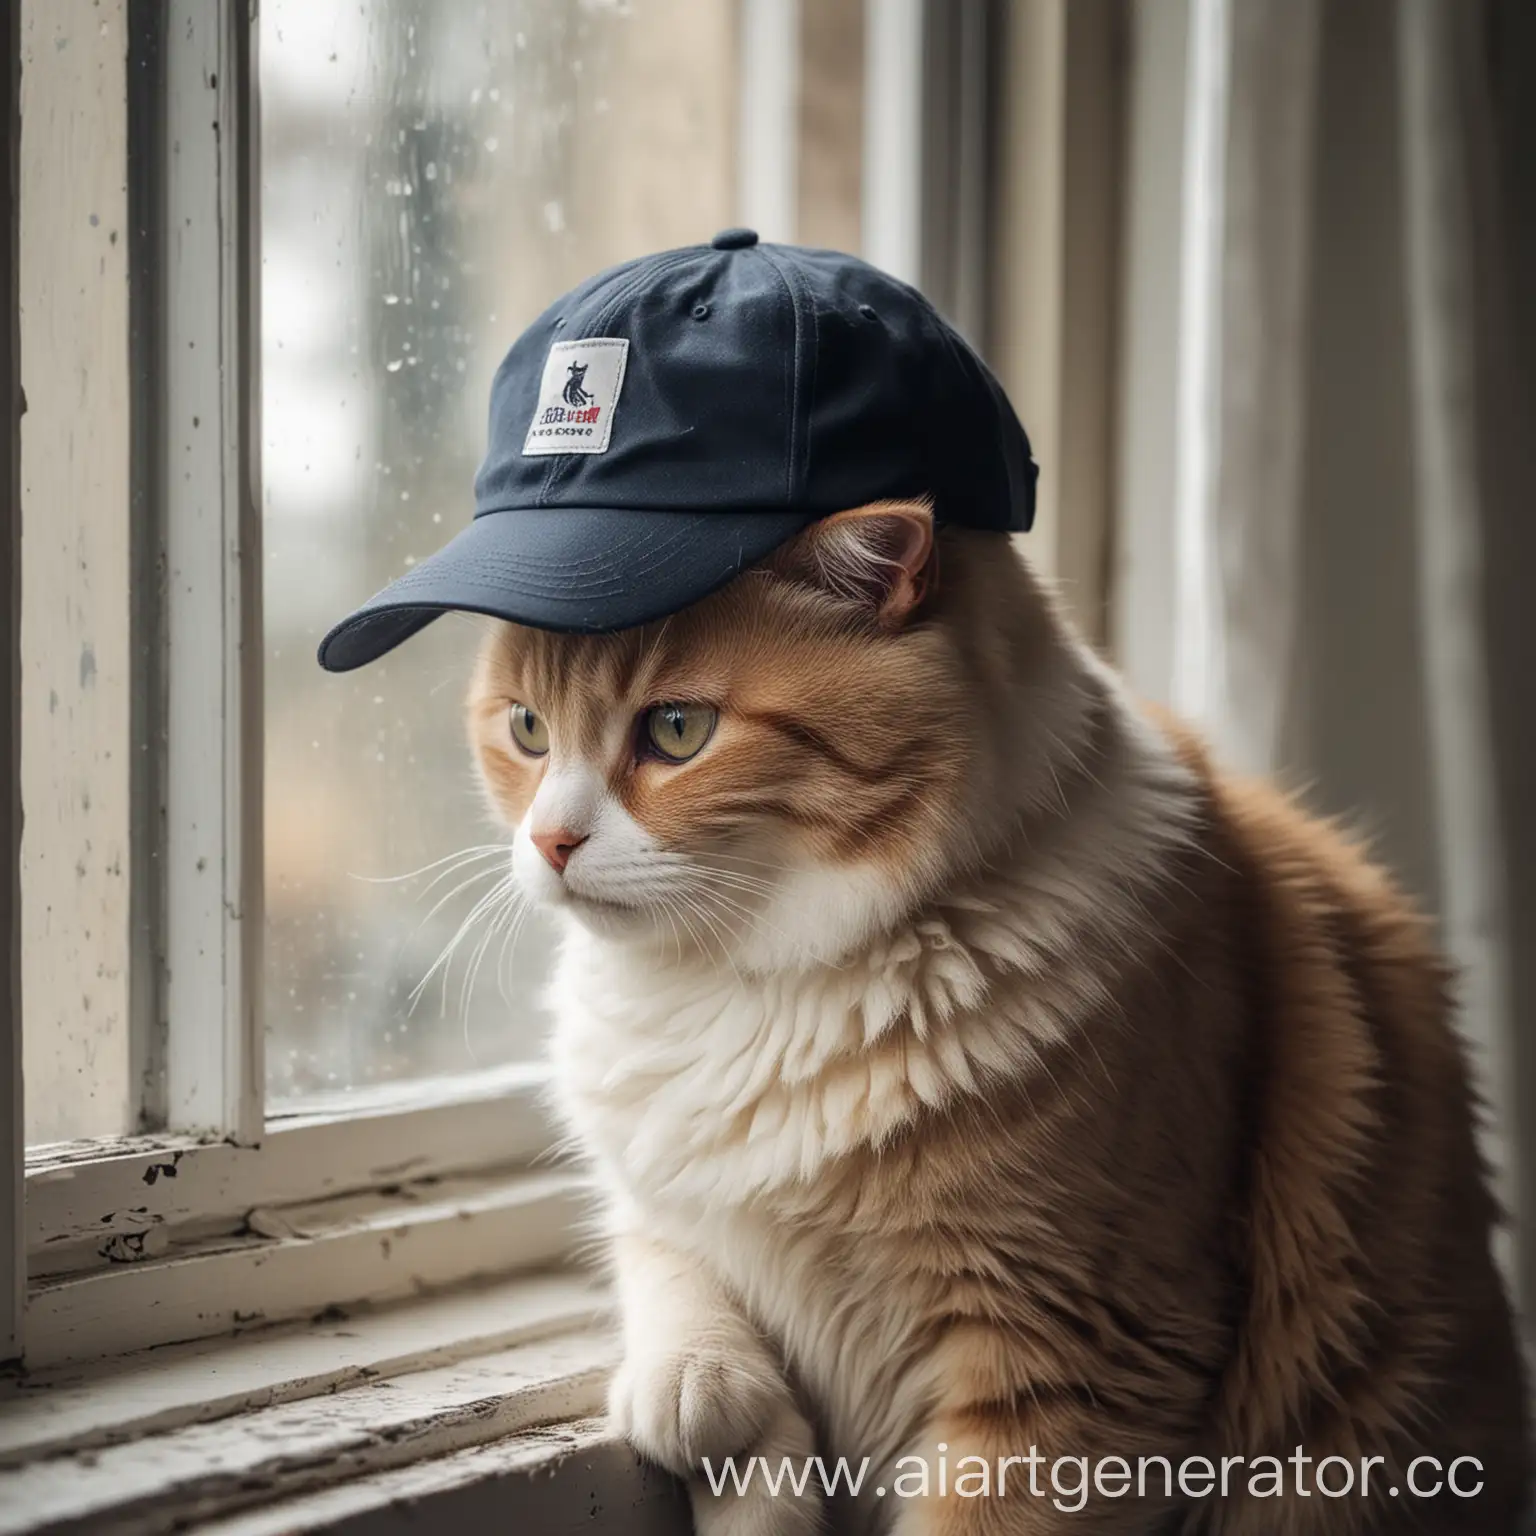 Lonely-Cat-in-Cap-Sitting-by-the-Window